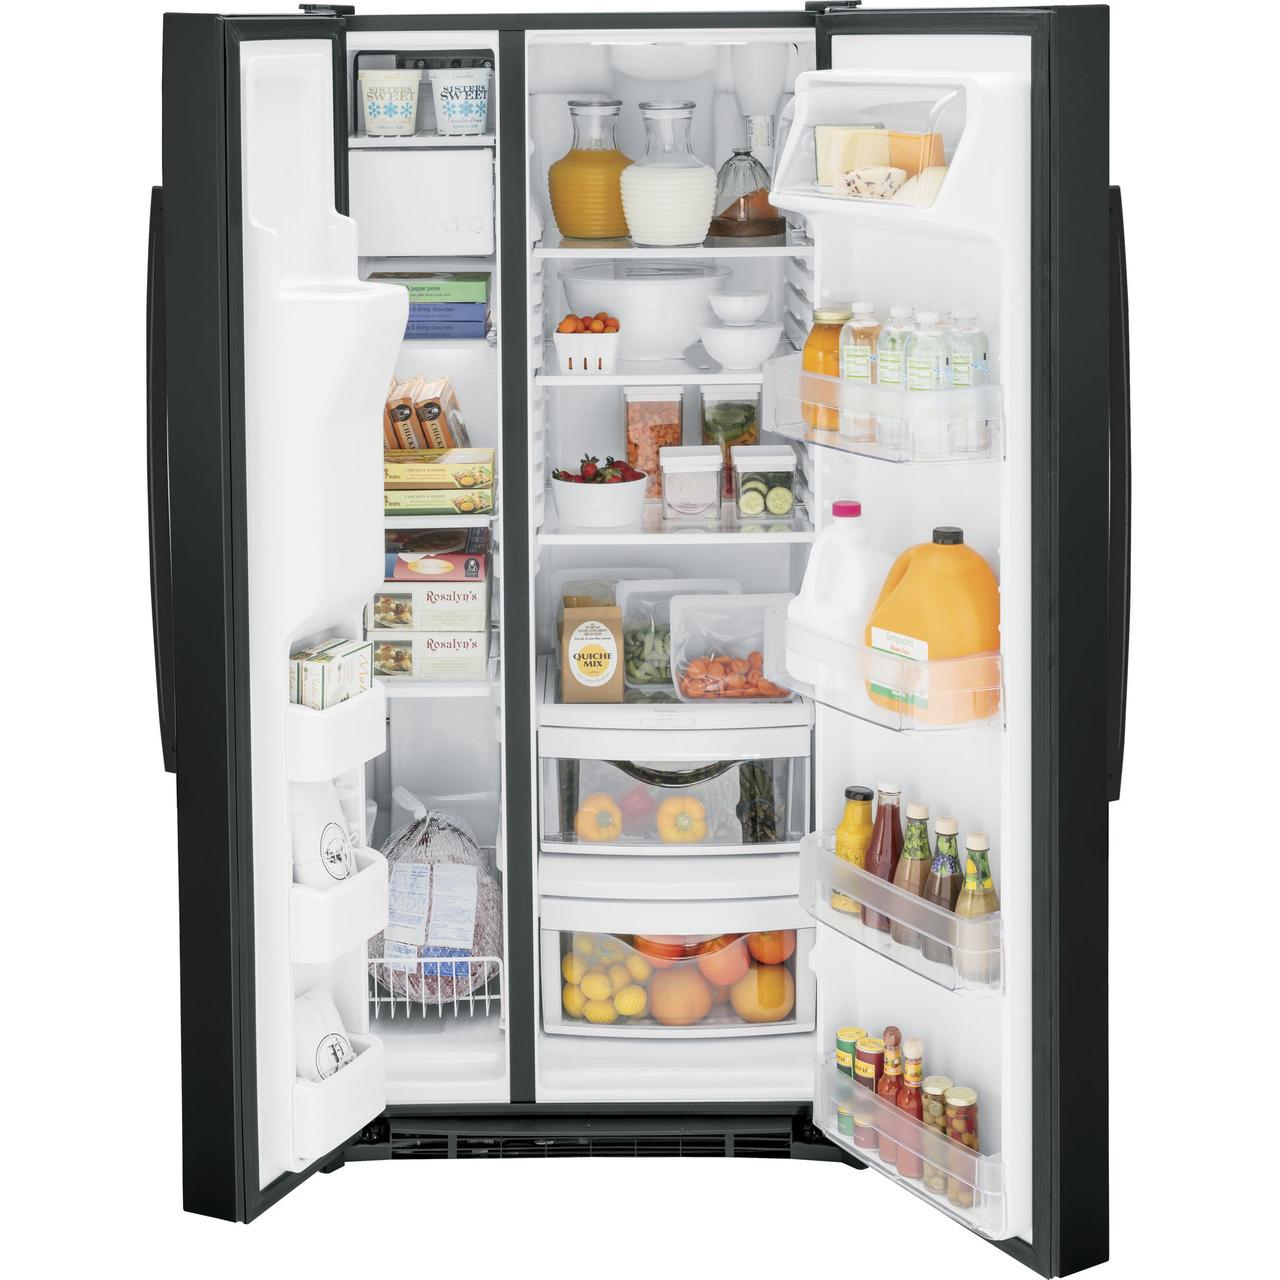 GE 33-inch, 23 cu. ft. Side-By-Side Refrigerator with Water and Ice Dispensing System GSS23GGPBB